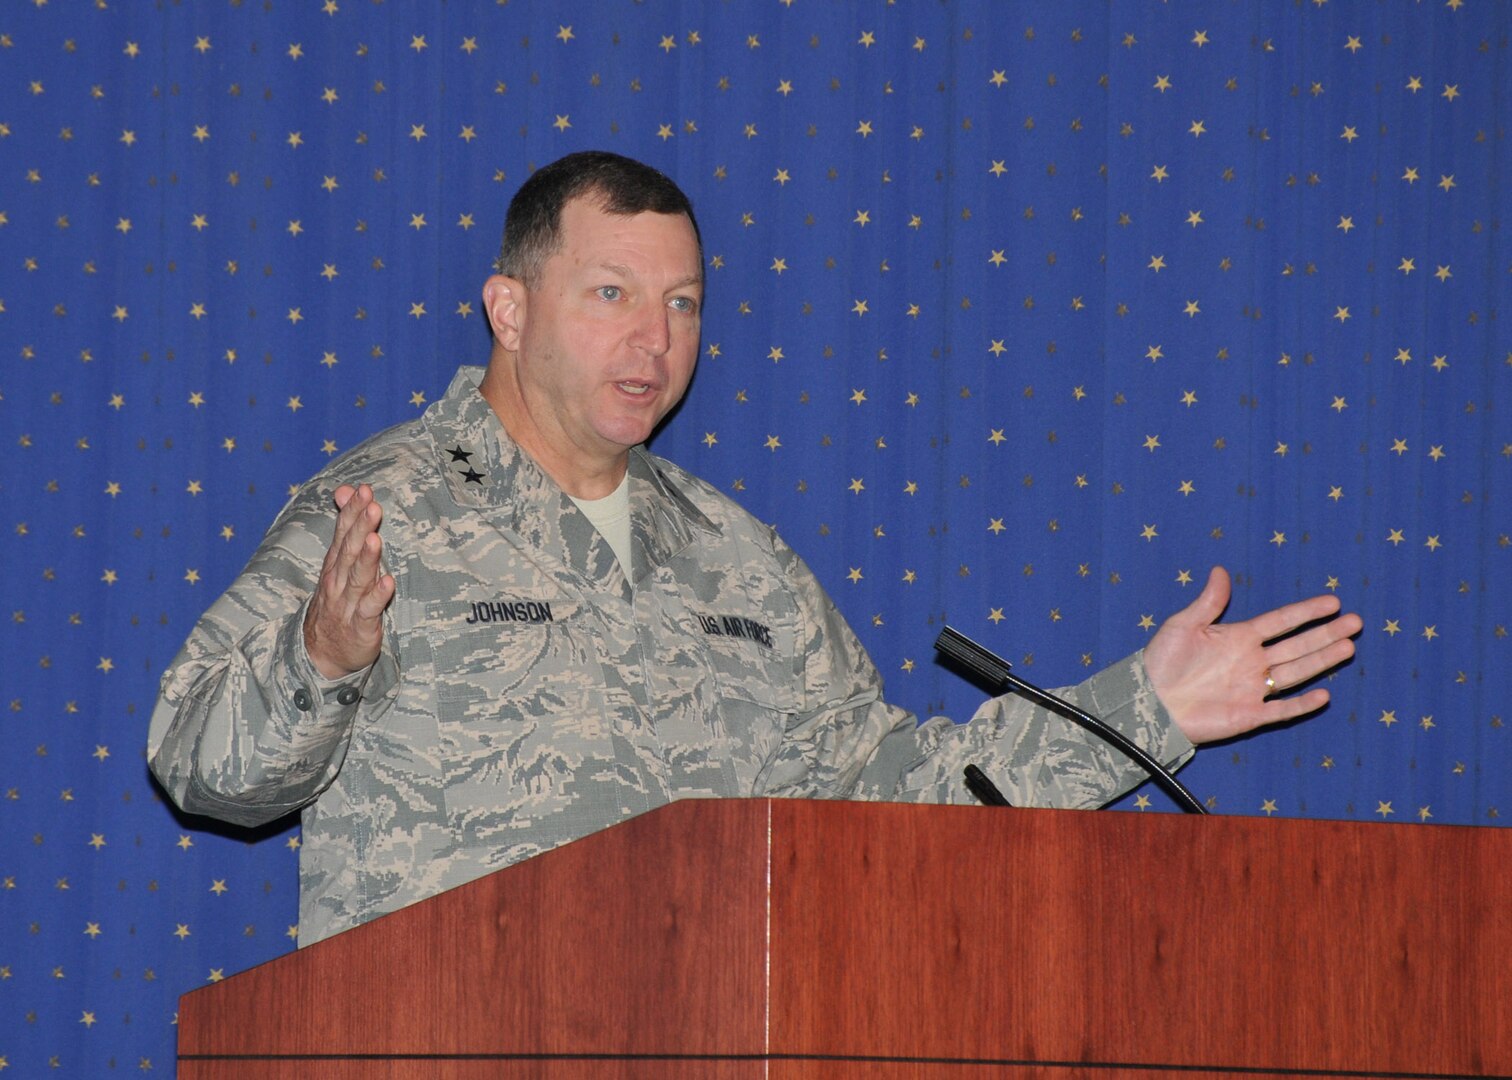 Two-star AF general speaking at lecturn.